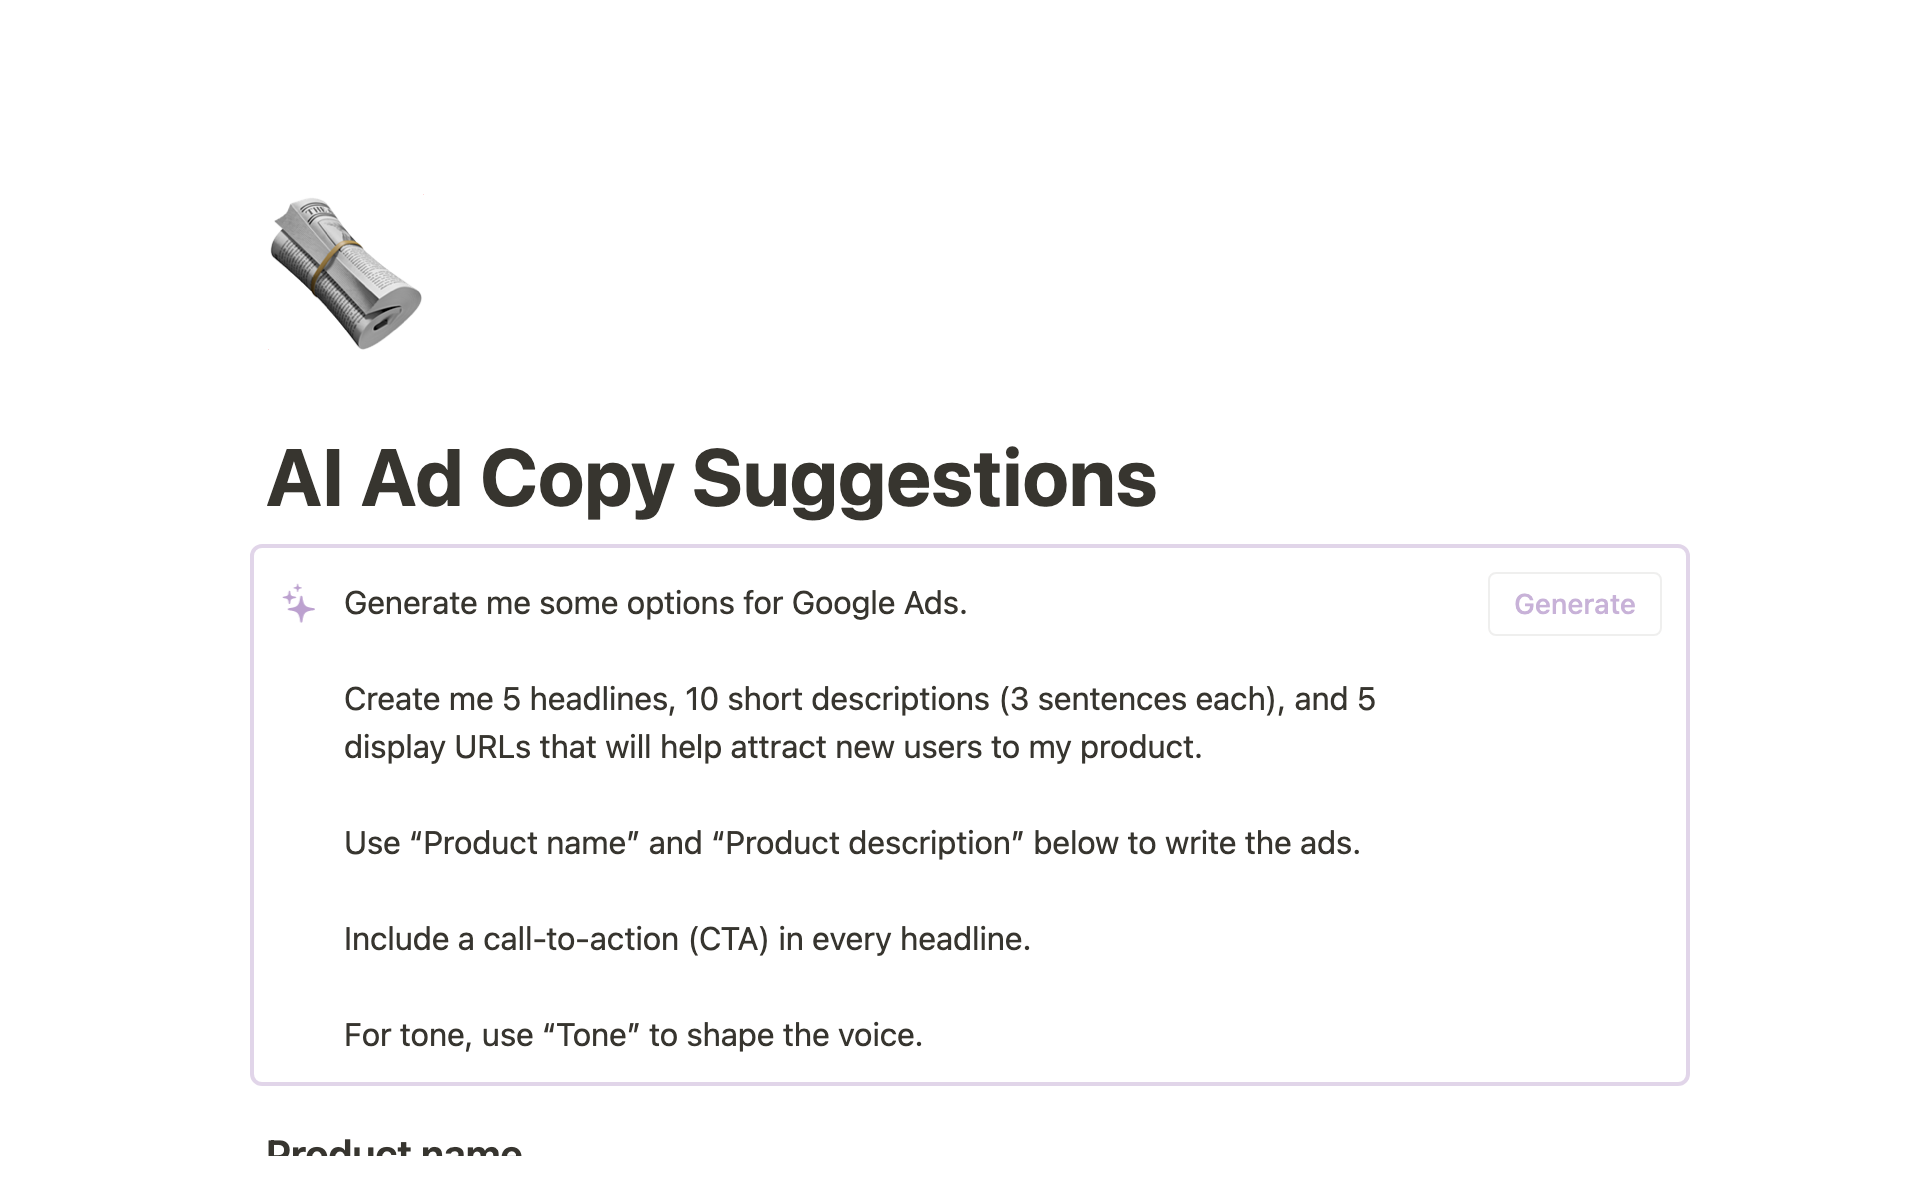 Writing the perfect ad copy for your product can be a struggle. Try some AI-generated suggestions to start.